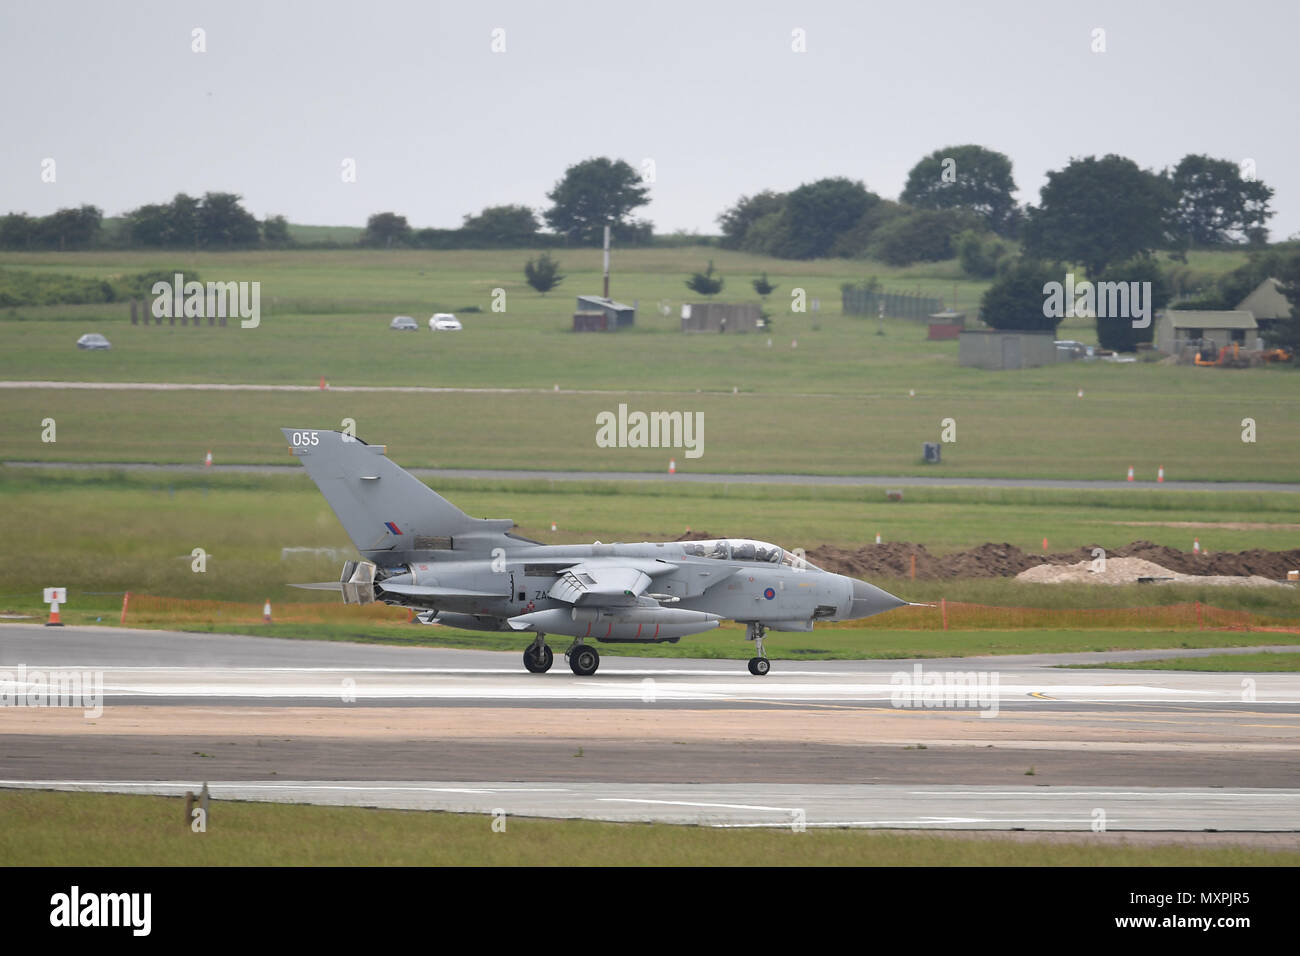 A Tornado GR4 comes in to land at RAF Marham, as construction work continues at the base in Norfolk, ahead of the arrival of the new F-35B Lightning stealth fighter jets later this week. Stock Photo